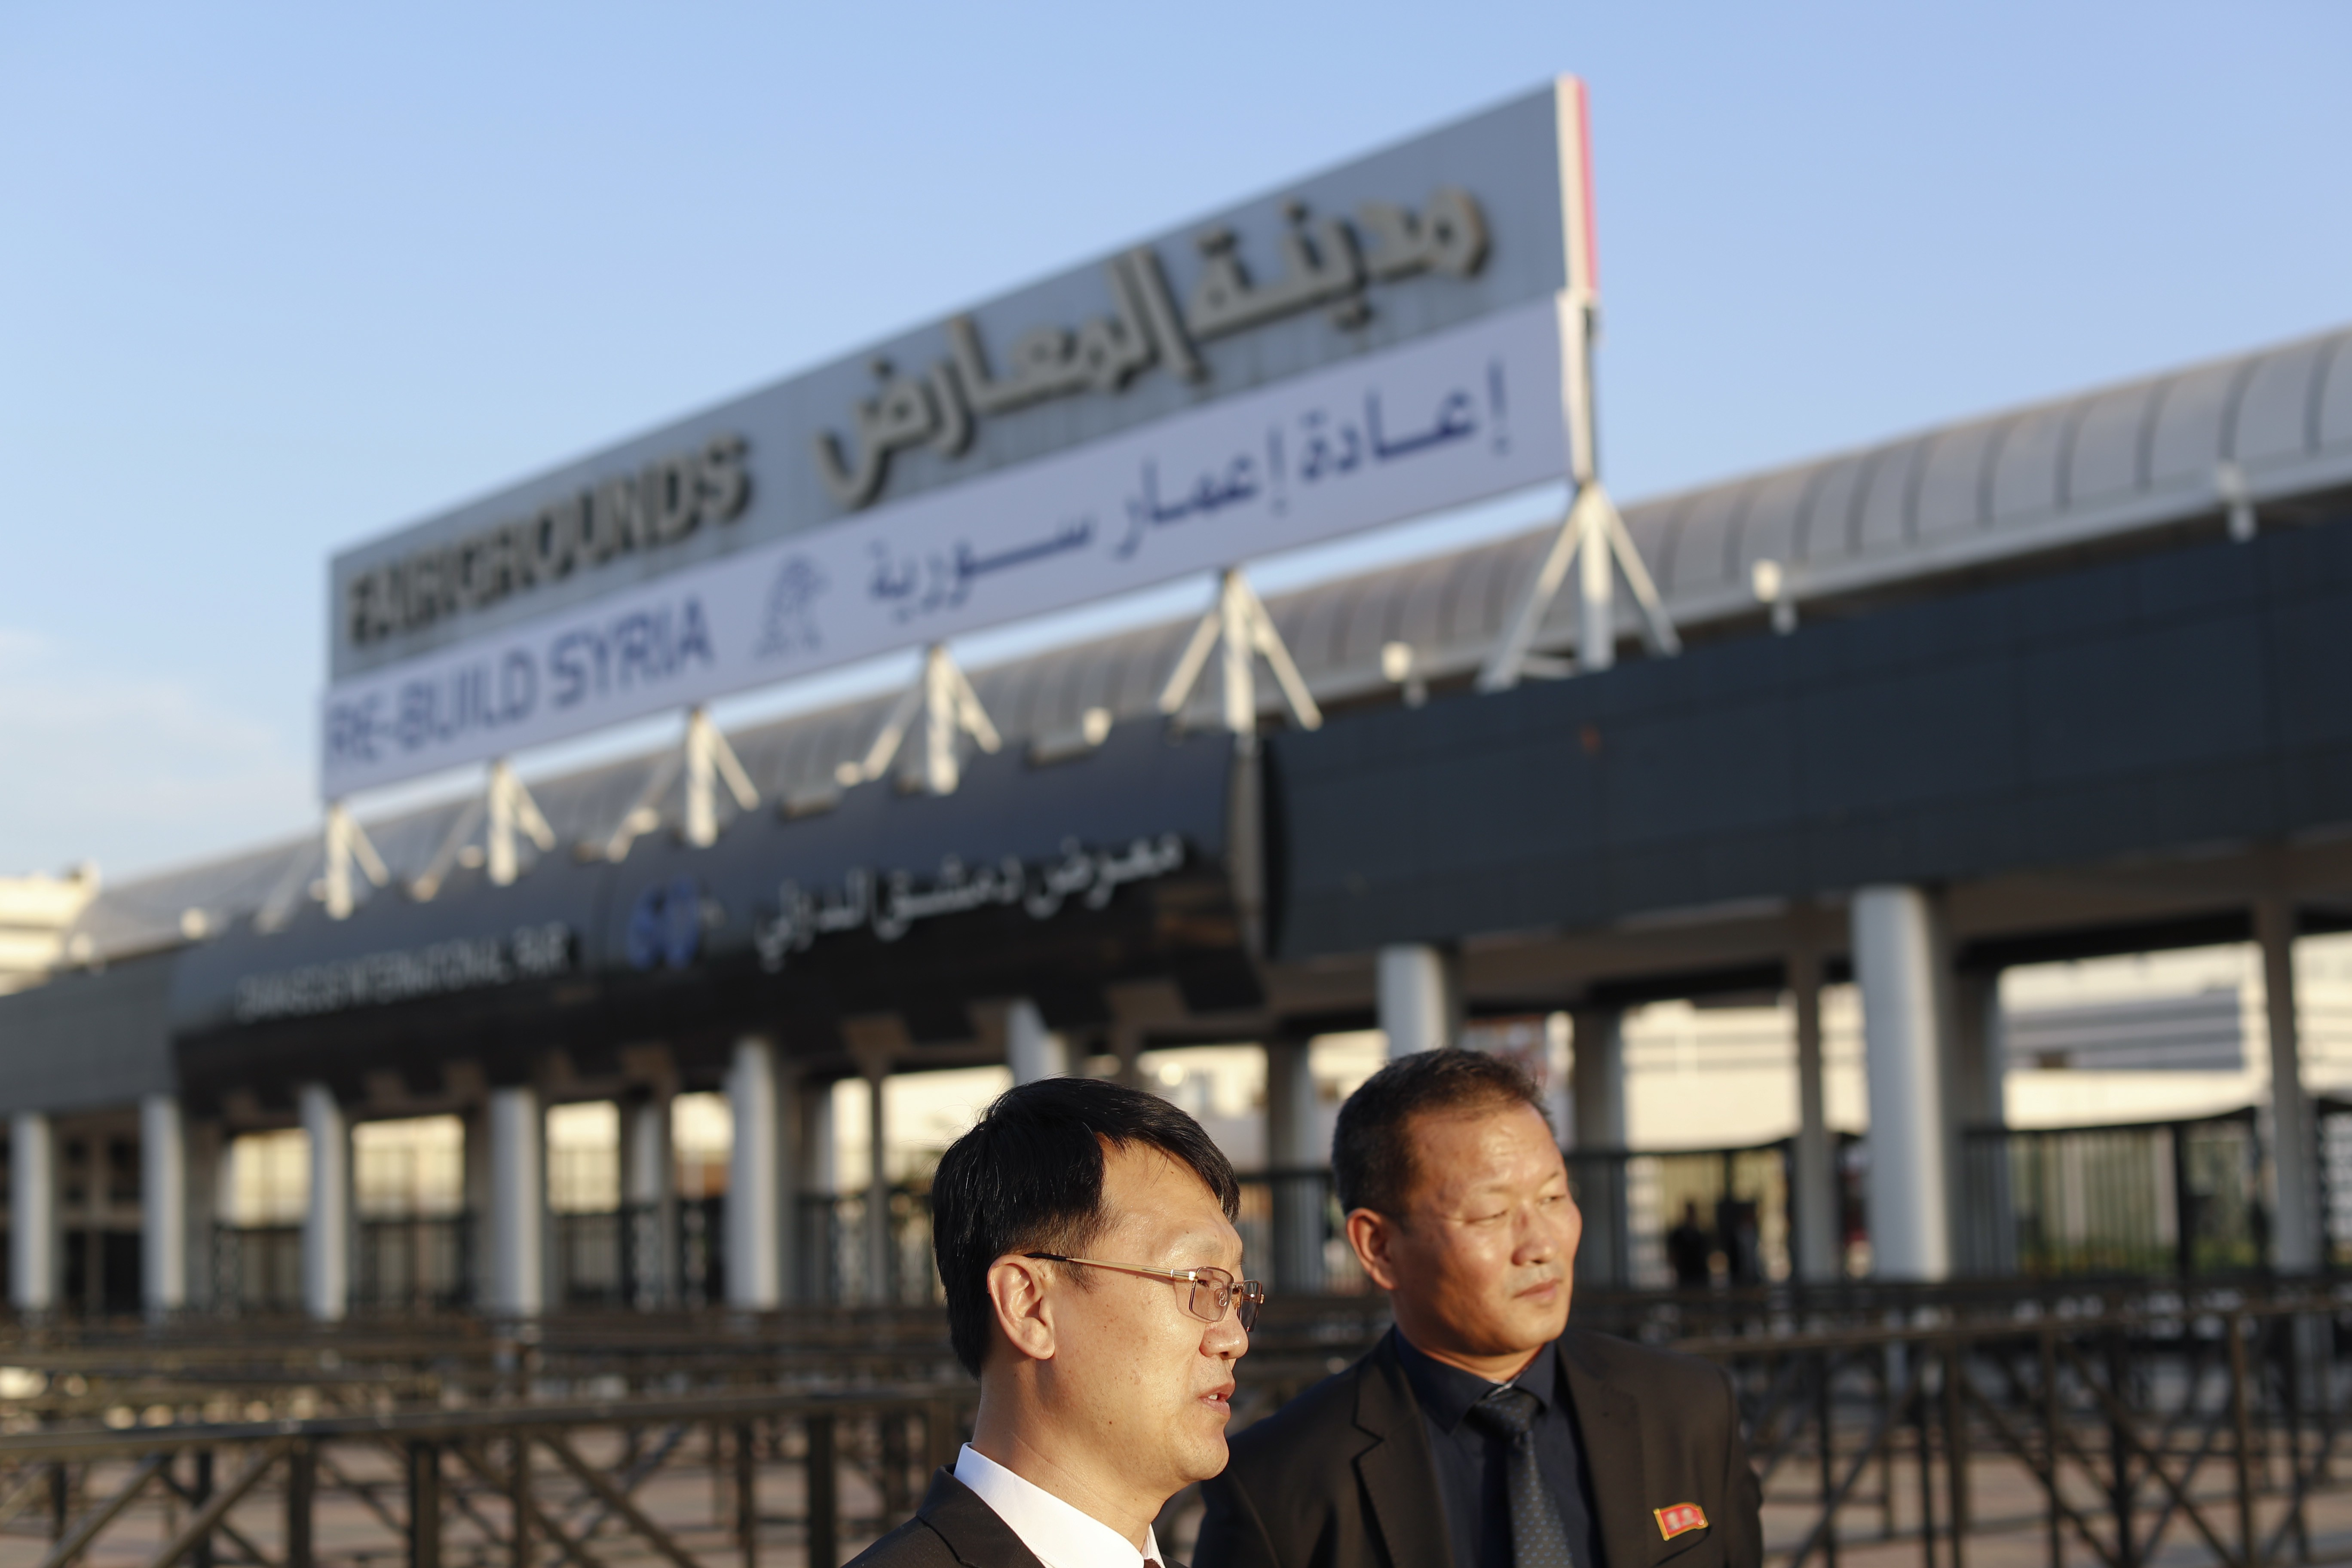 Chinese visitors at the Syria rebuilding conference earlier this month. Photo: AP